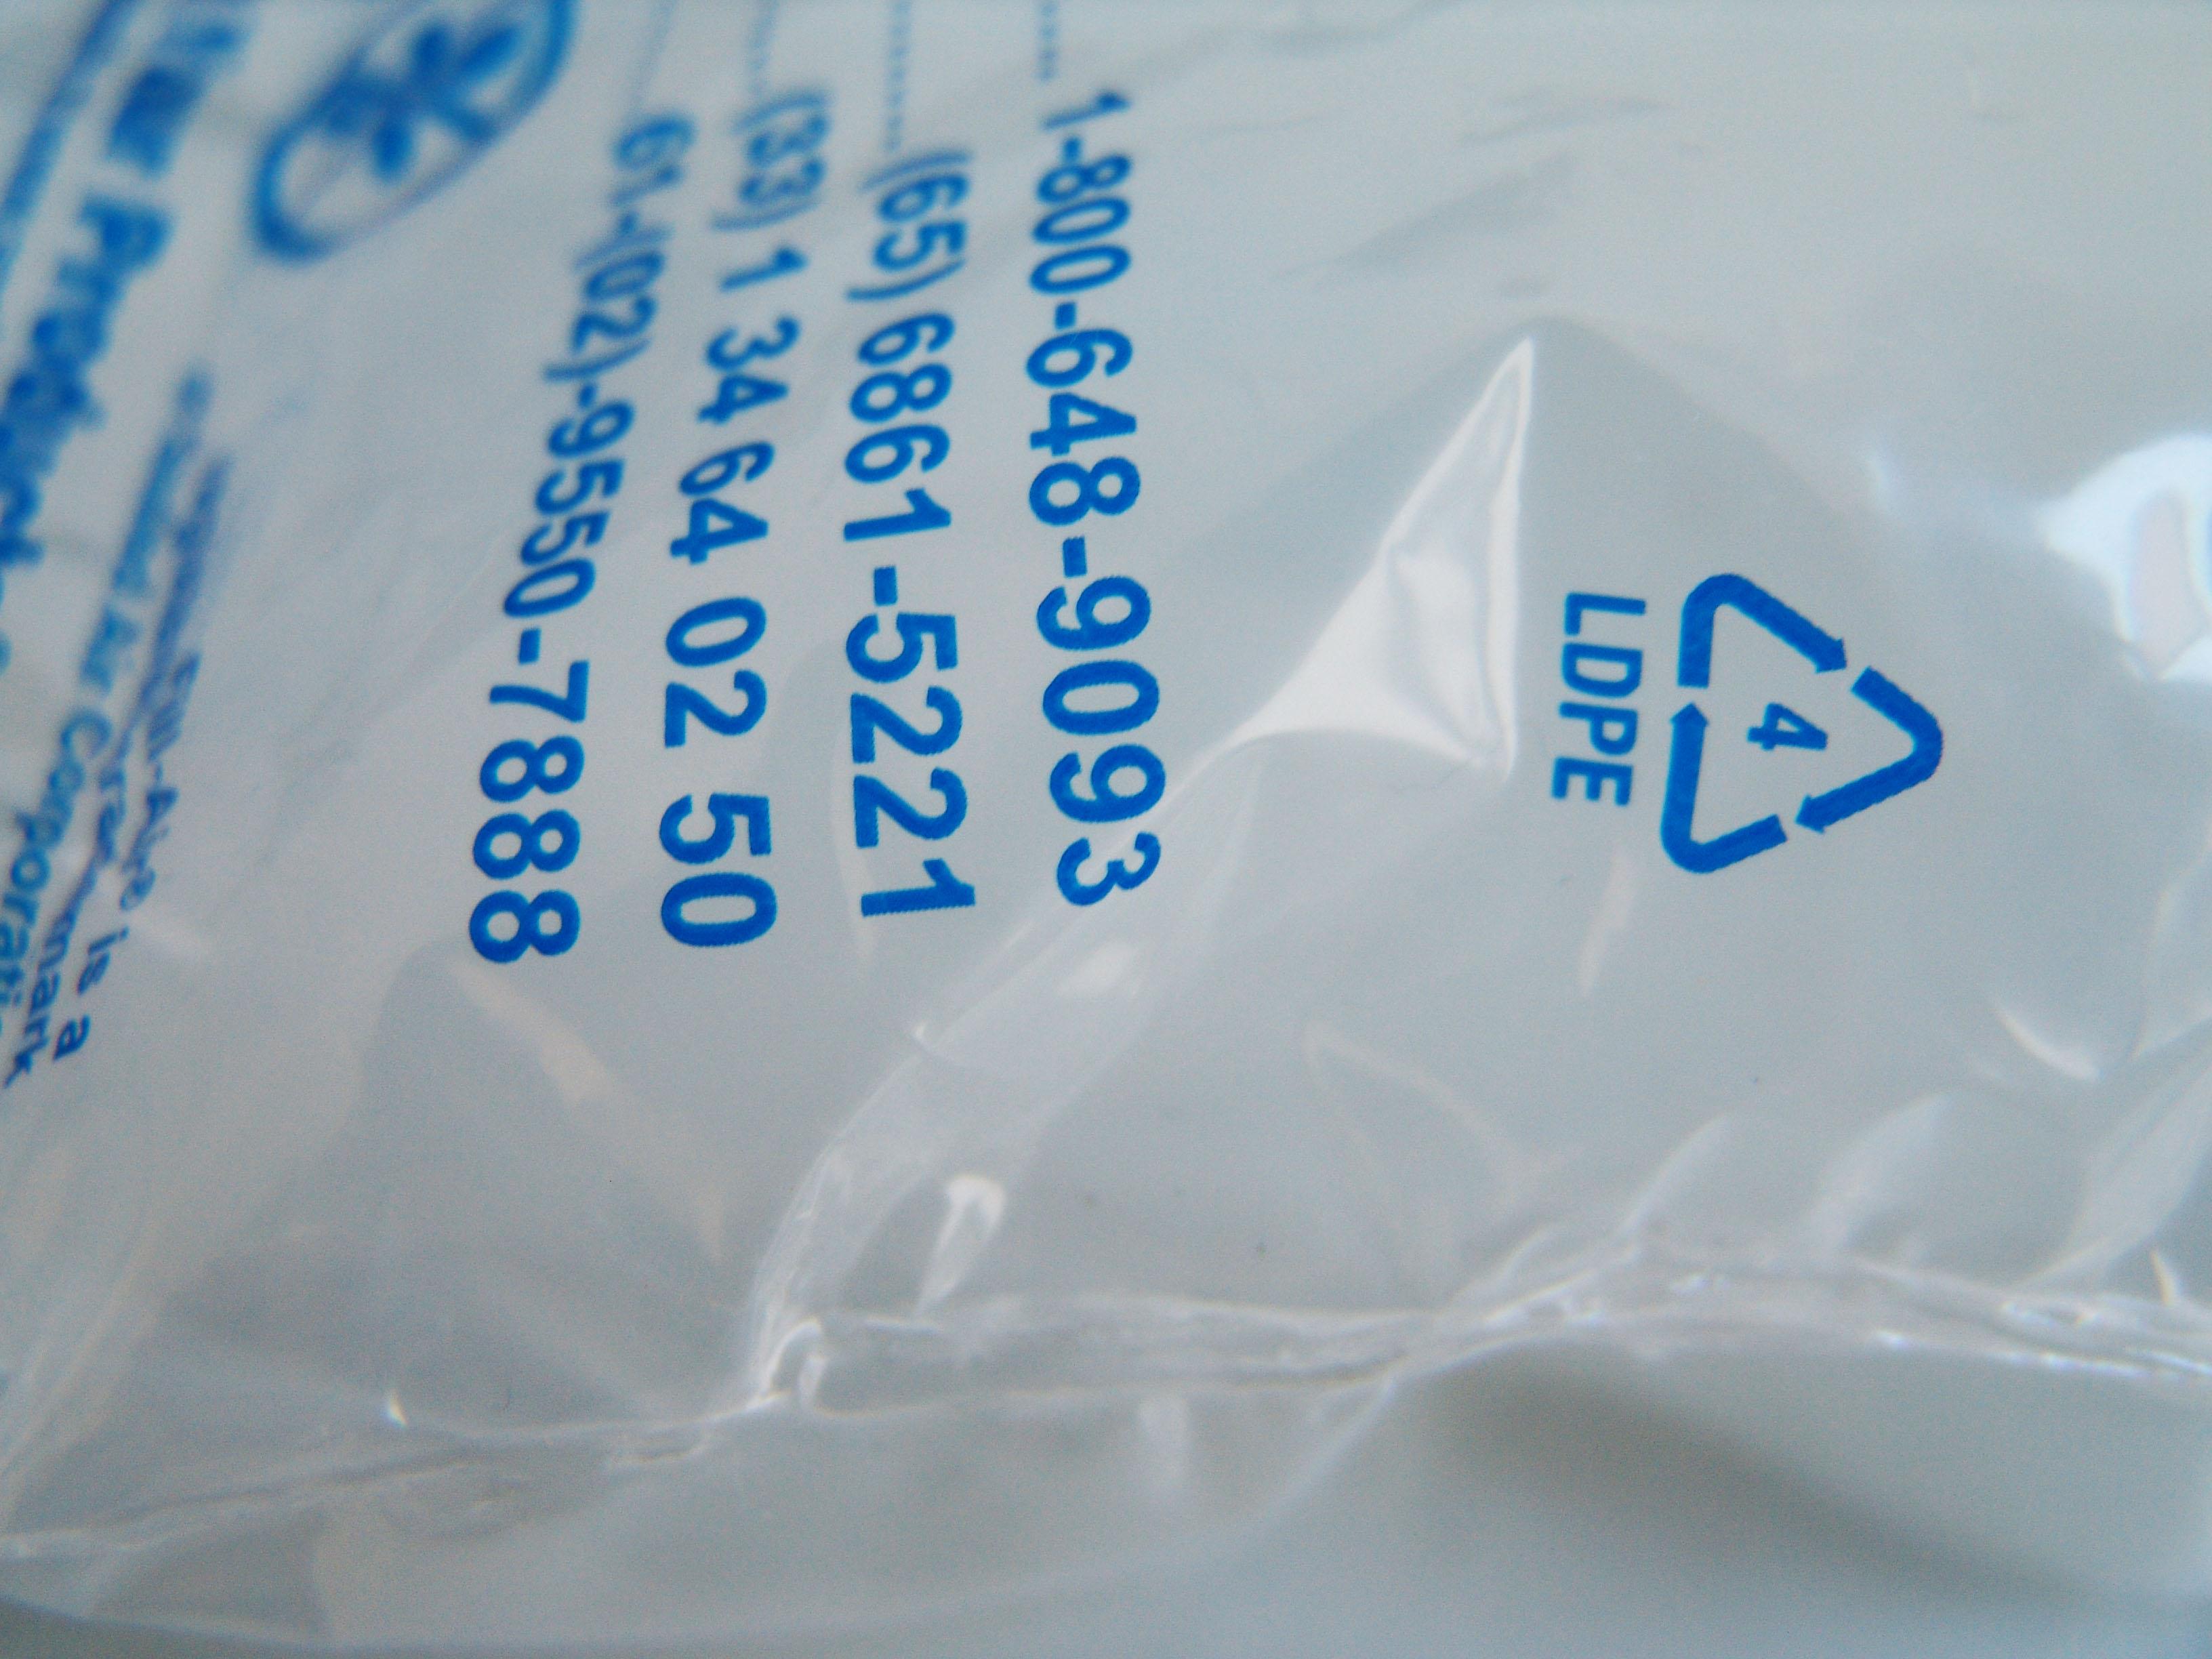 What Do Numbers 1 7 On Recyclable Plastics Mean